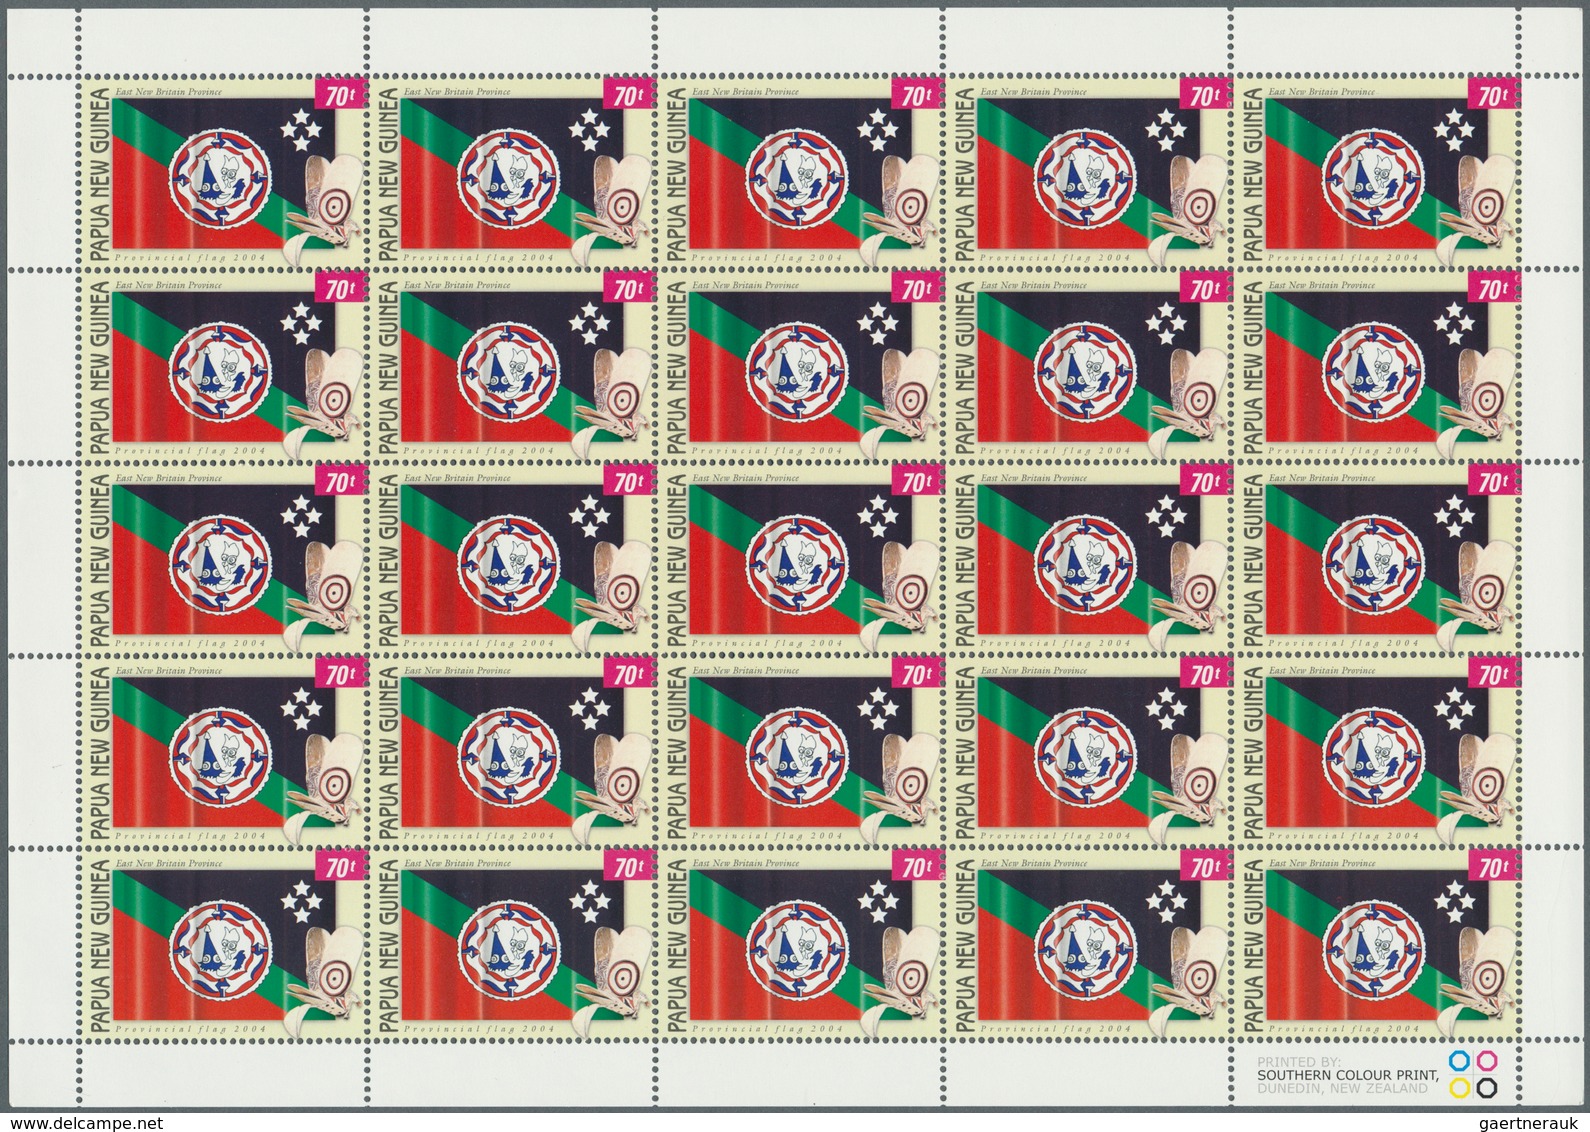 Papua Neuguinea: 1999/2007, marvelous stock of never hinged sheets, many in original packets of 500,